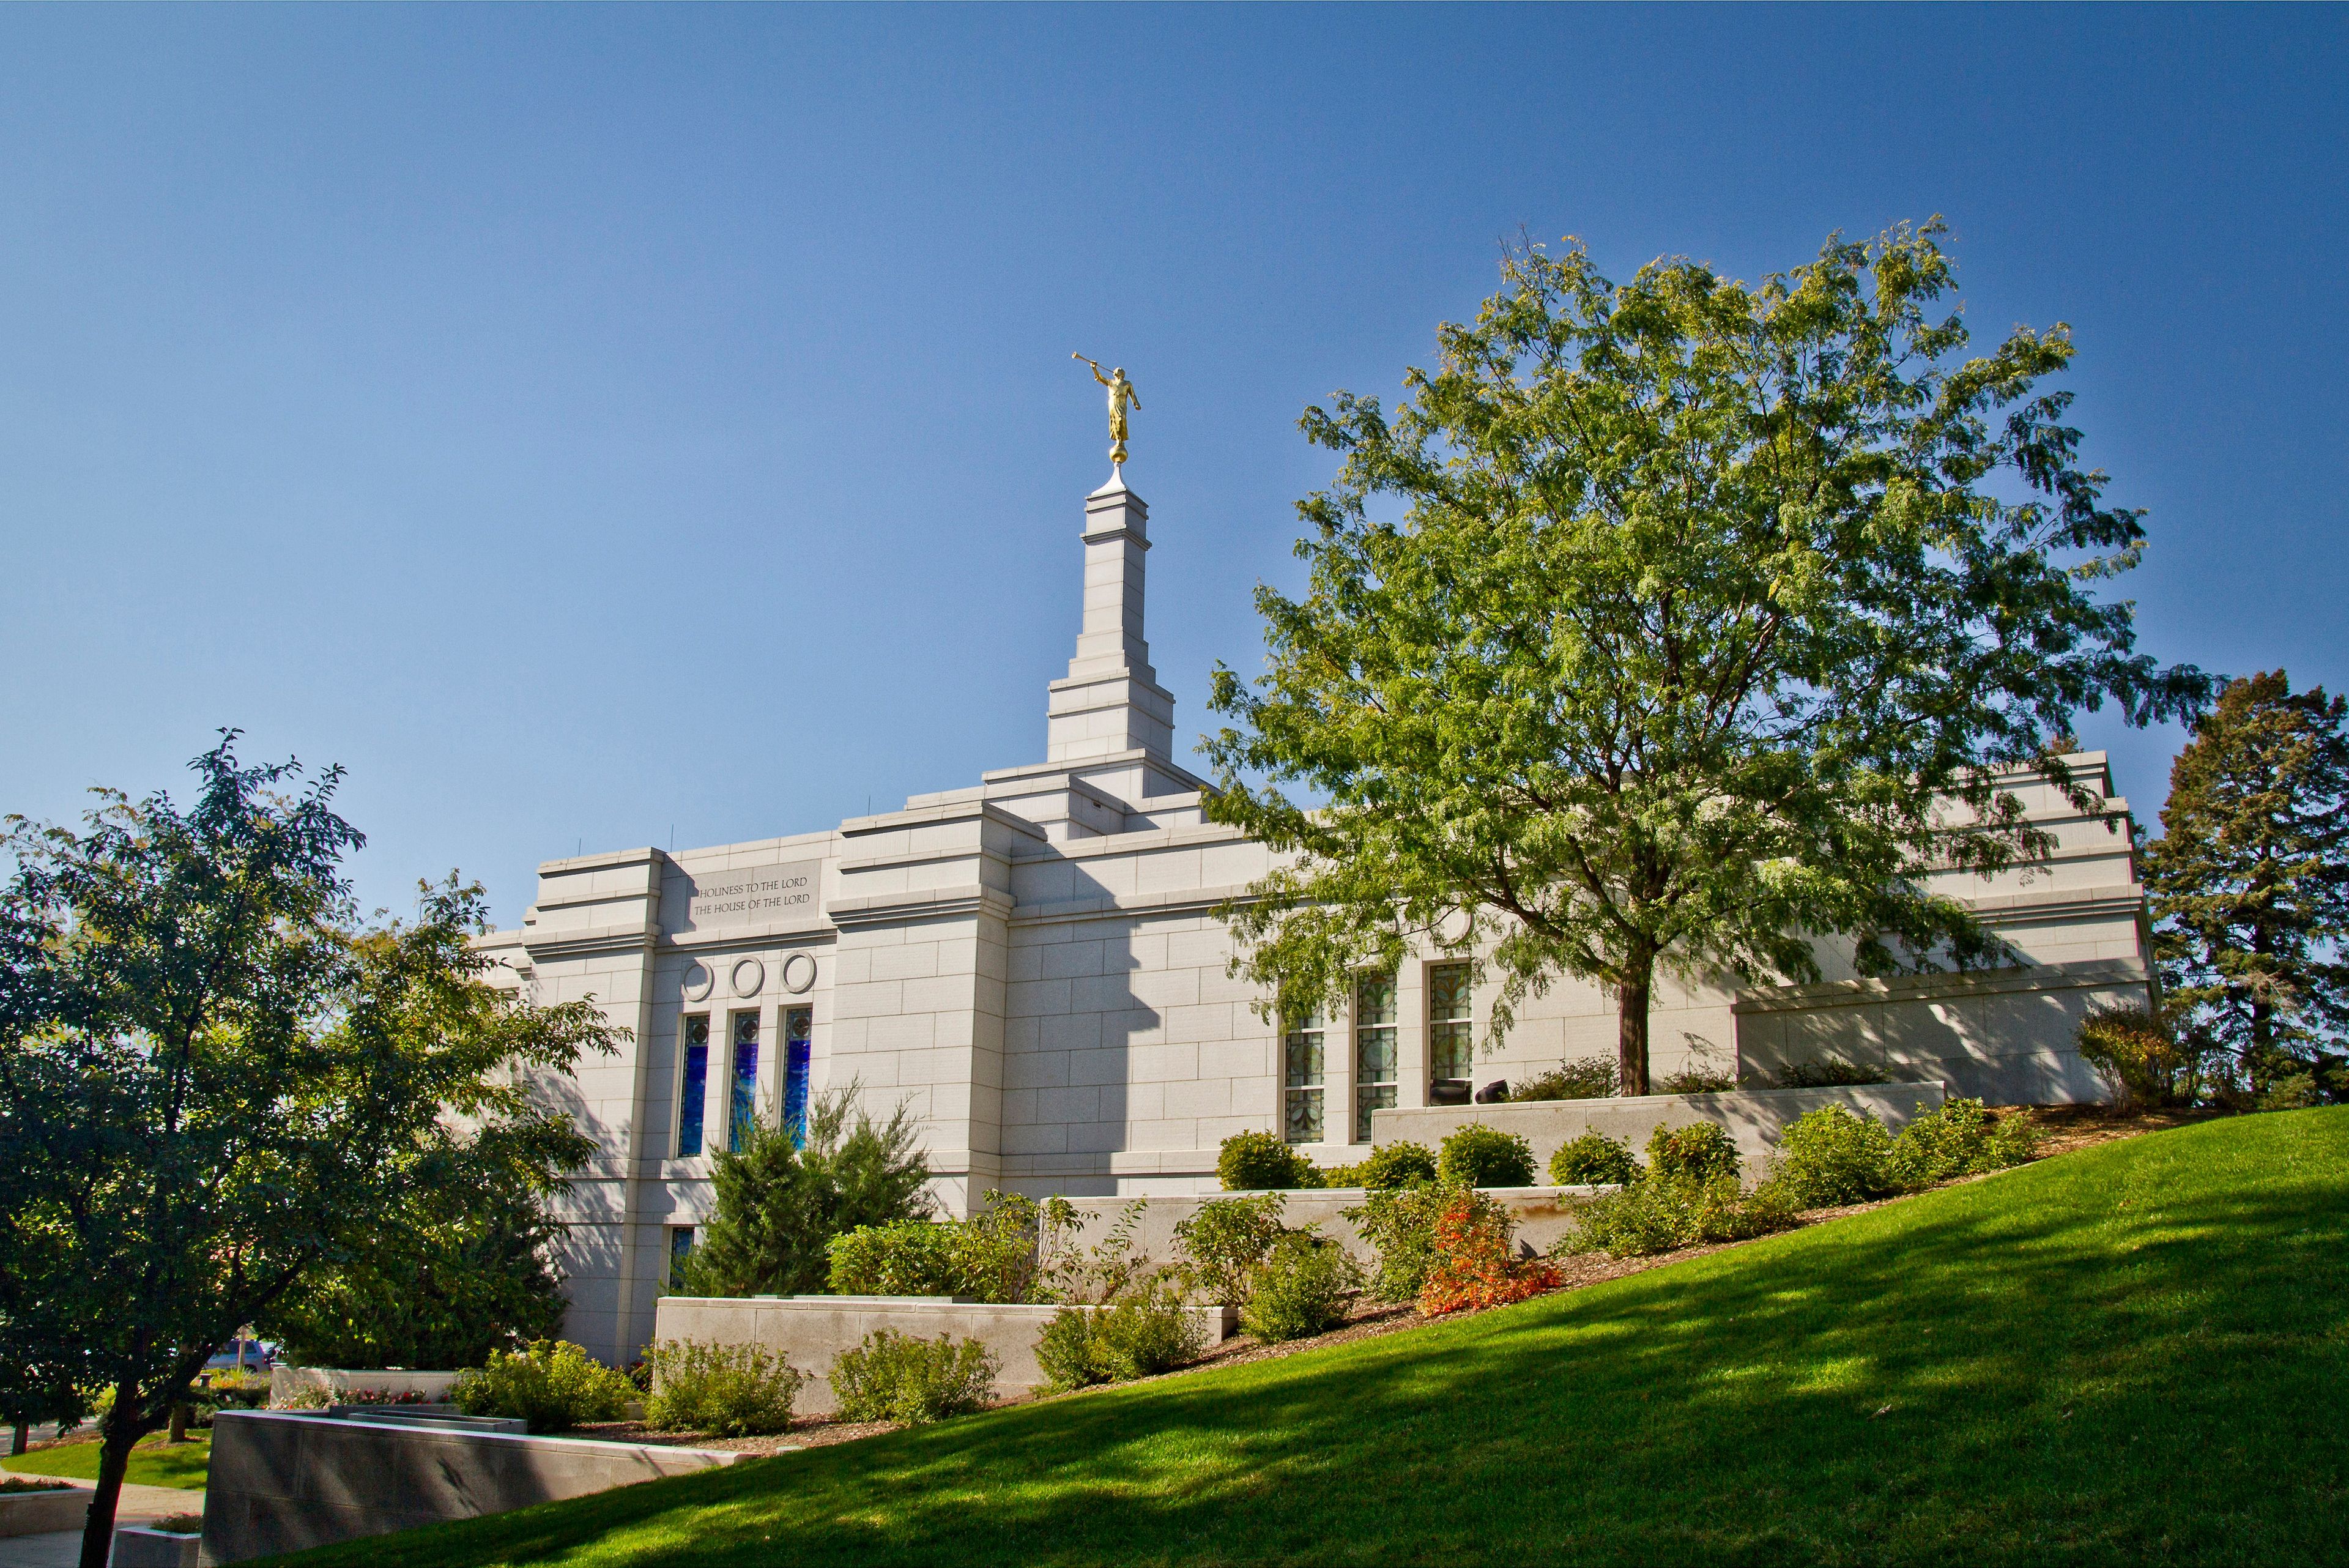 The east side of the Winter Quarters Nebraska Temple, including the scenery, spire, and windows.